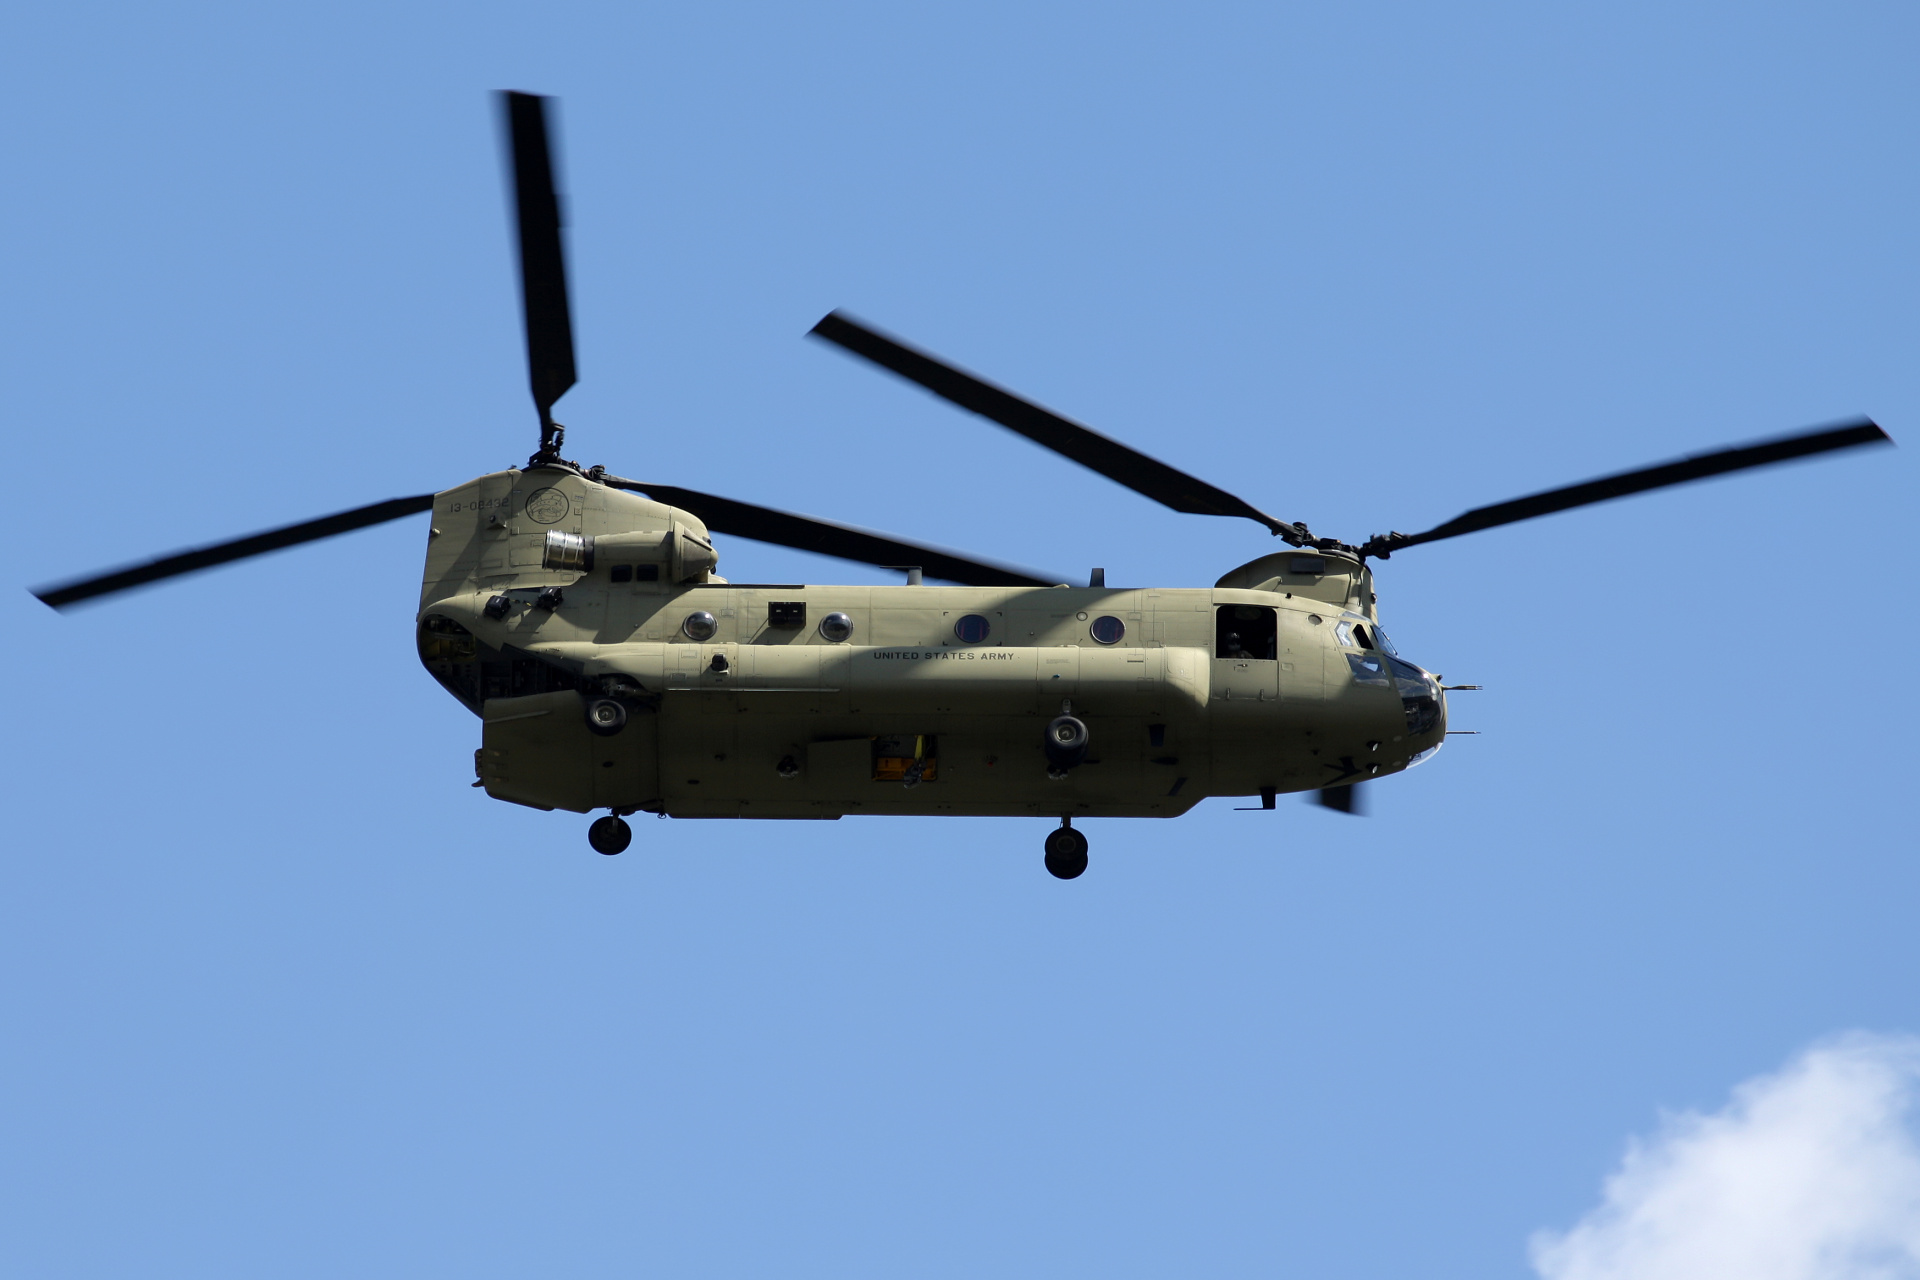 Boeing CH-47F Chinook, 13-08432, U.S. Army (Aircraft » Polish Army Day Parade fly-by)